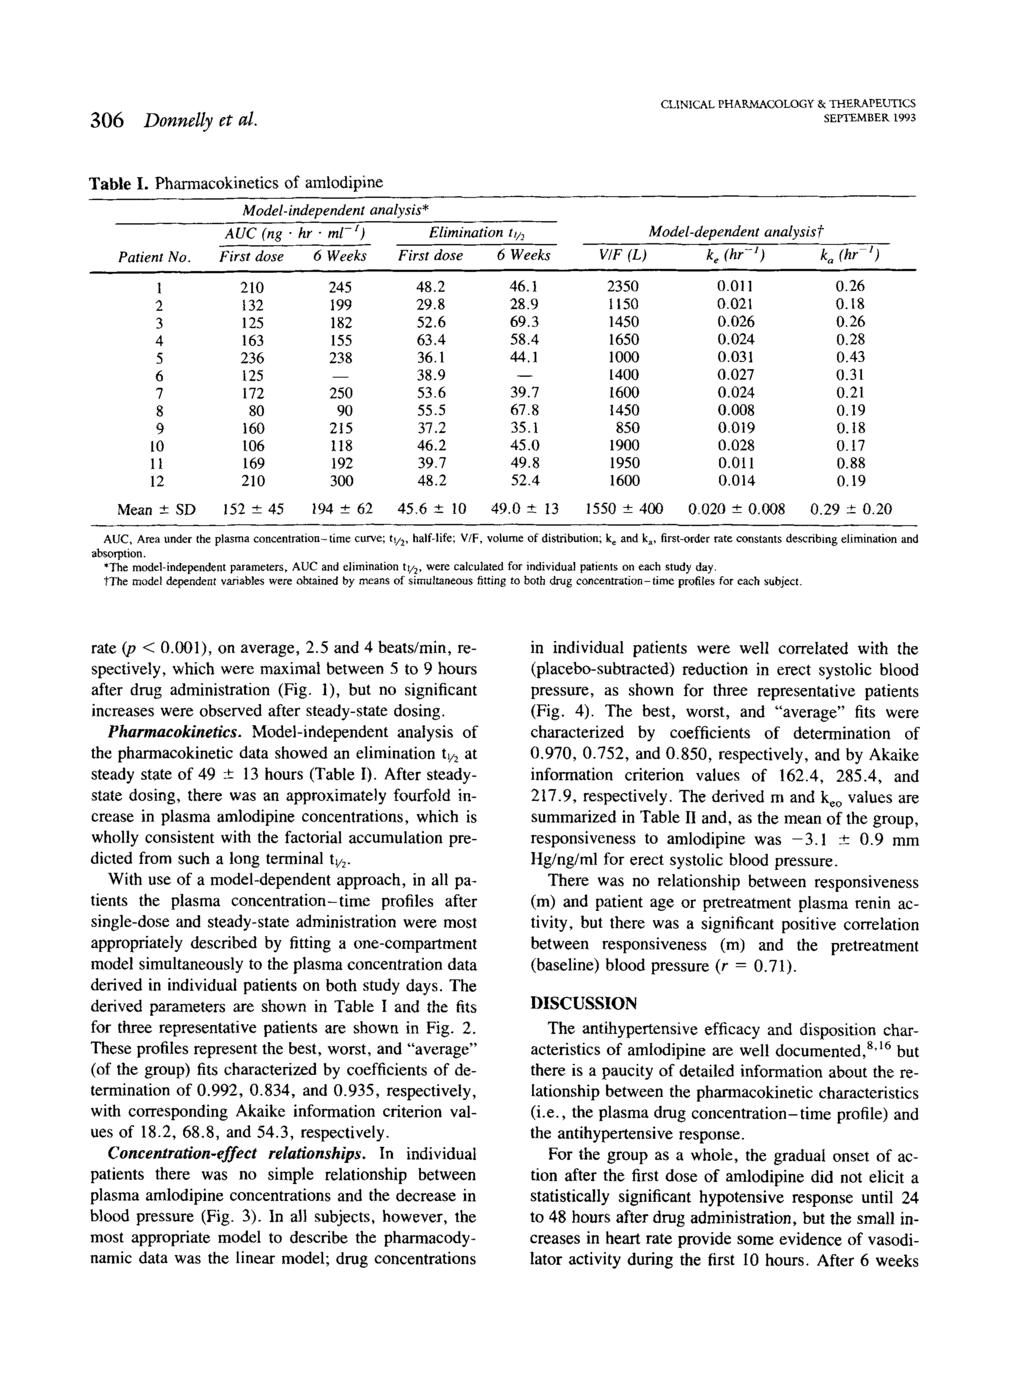 306 Donnelly et al. CLINICAL PHARMACOLOGY & THERAPEUTICS SEPTEMBER 1993 Table I. Pharmacokinetics of amlodipine Model-independent analysis* AUC (ng. hr.